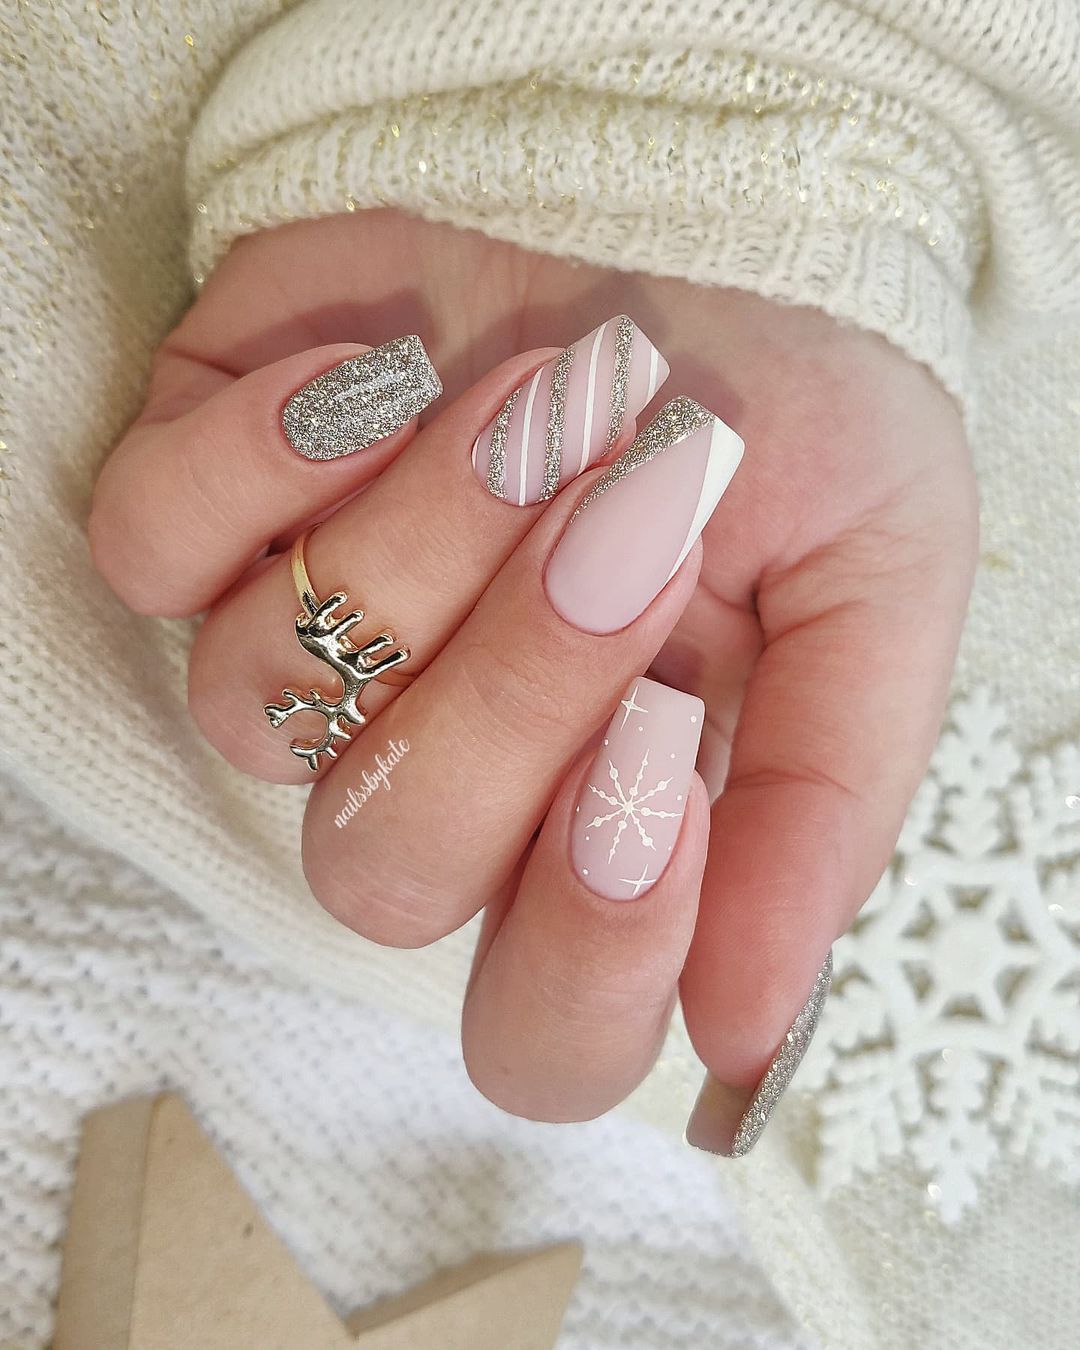 Nude Nails with Snowflakes and Silver Glittery